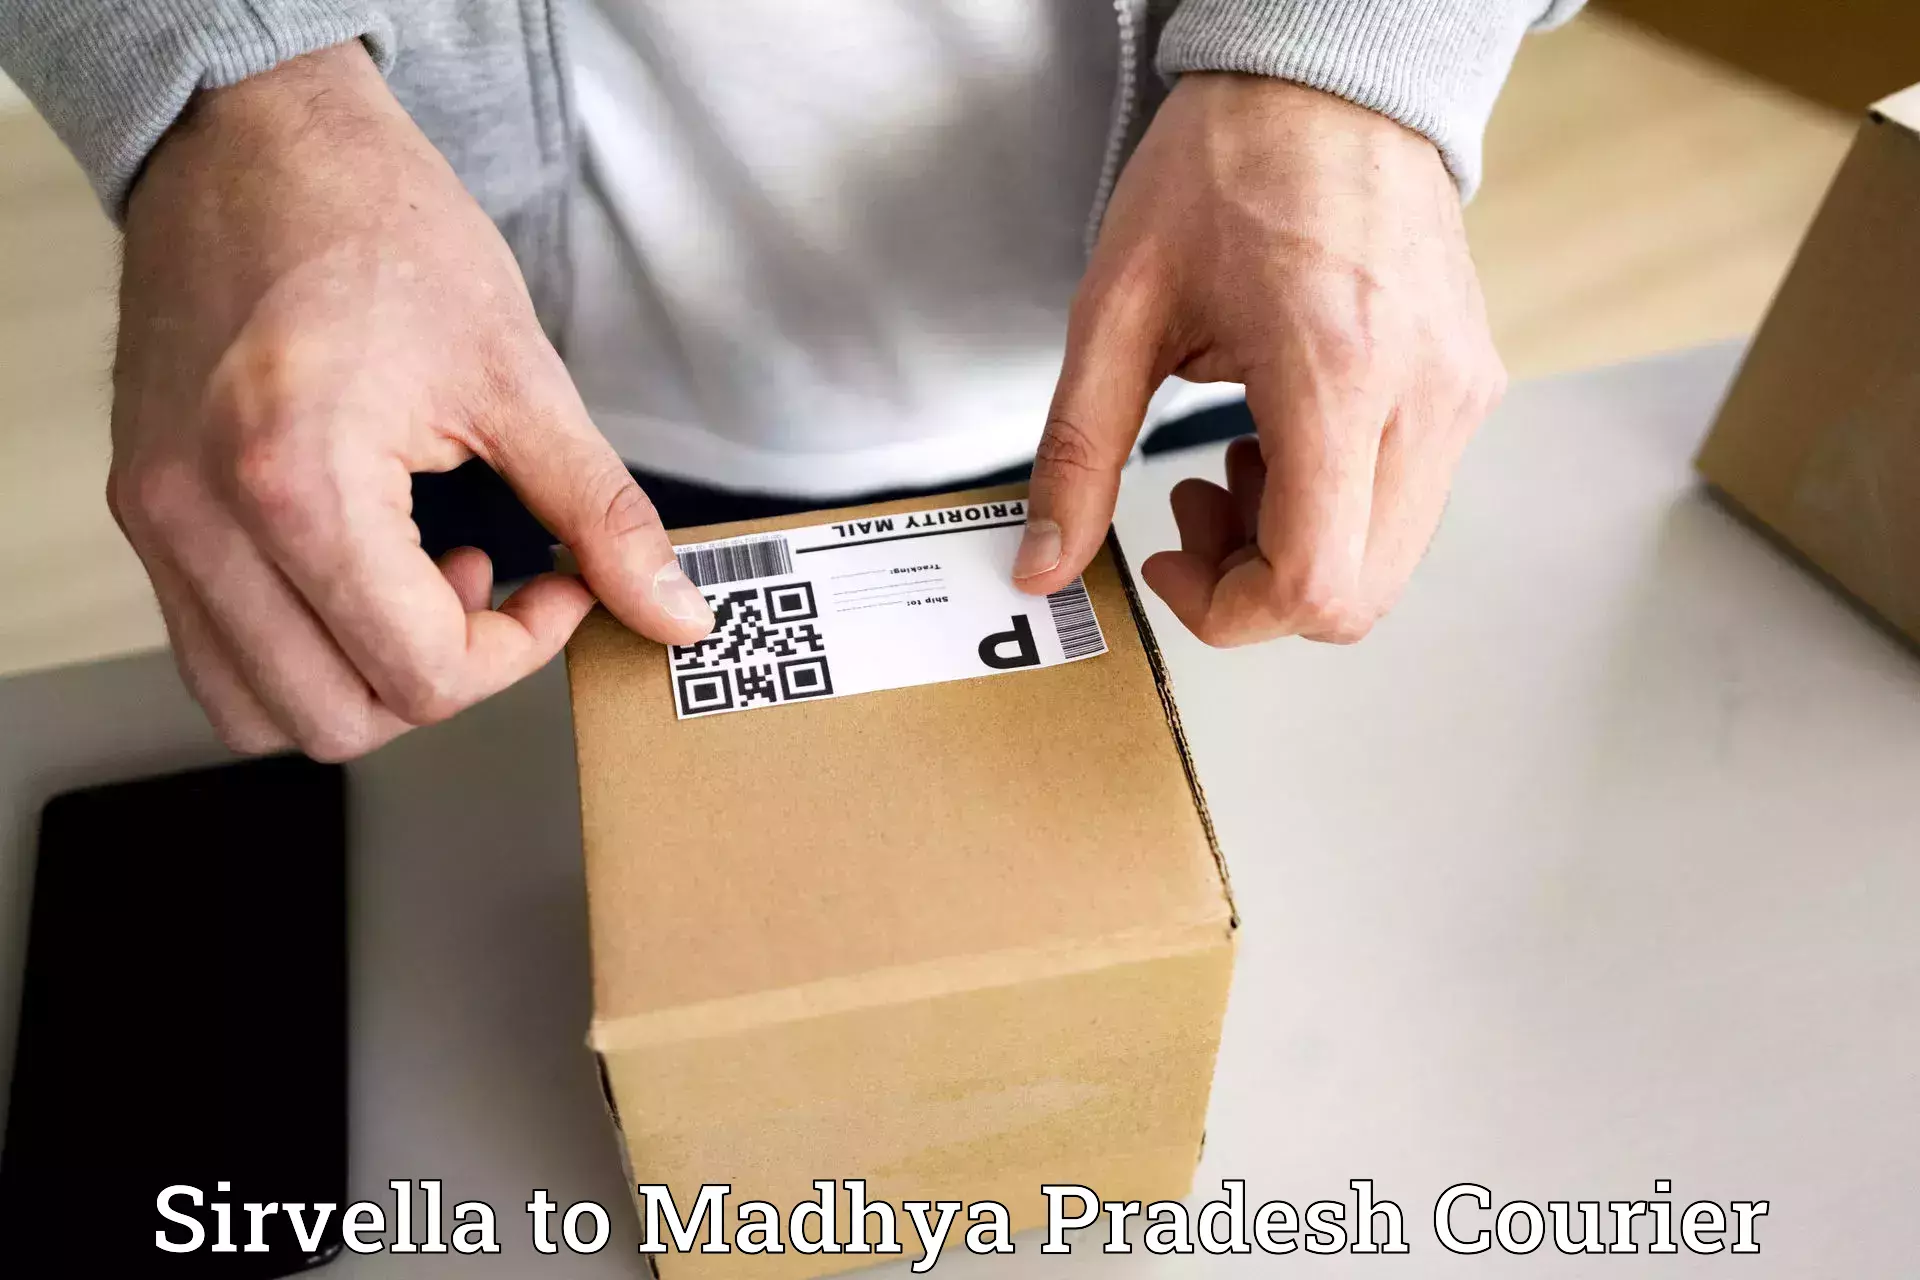 Bulk courier orders Sirvella to Udaipura